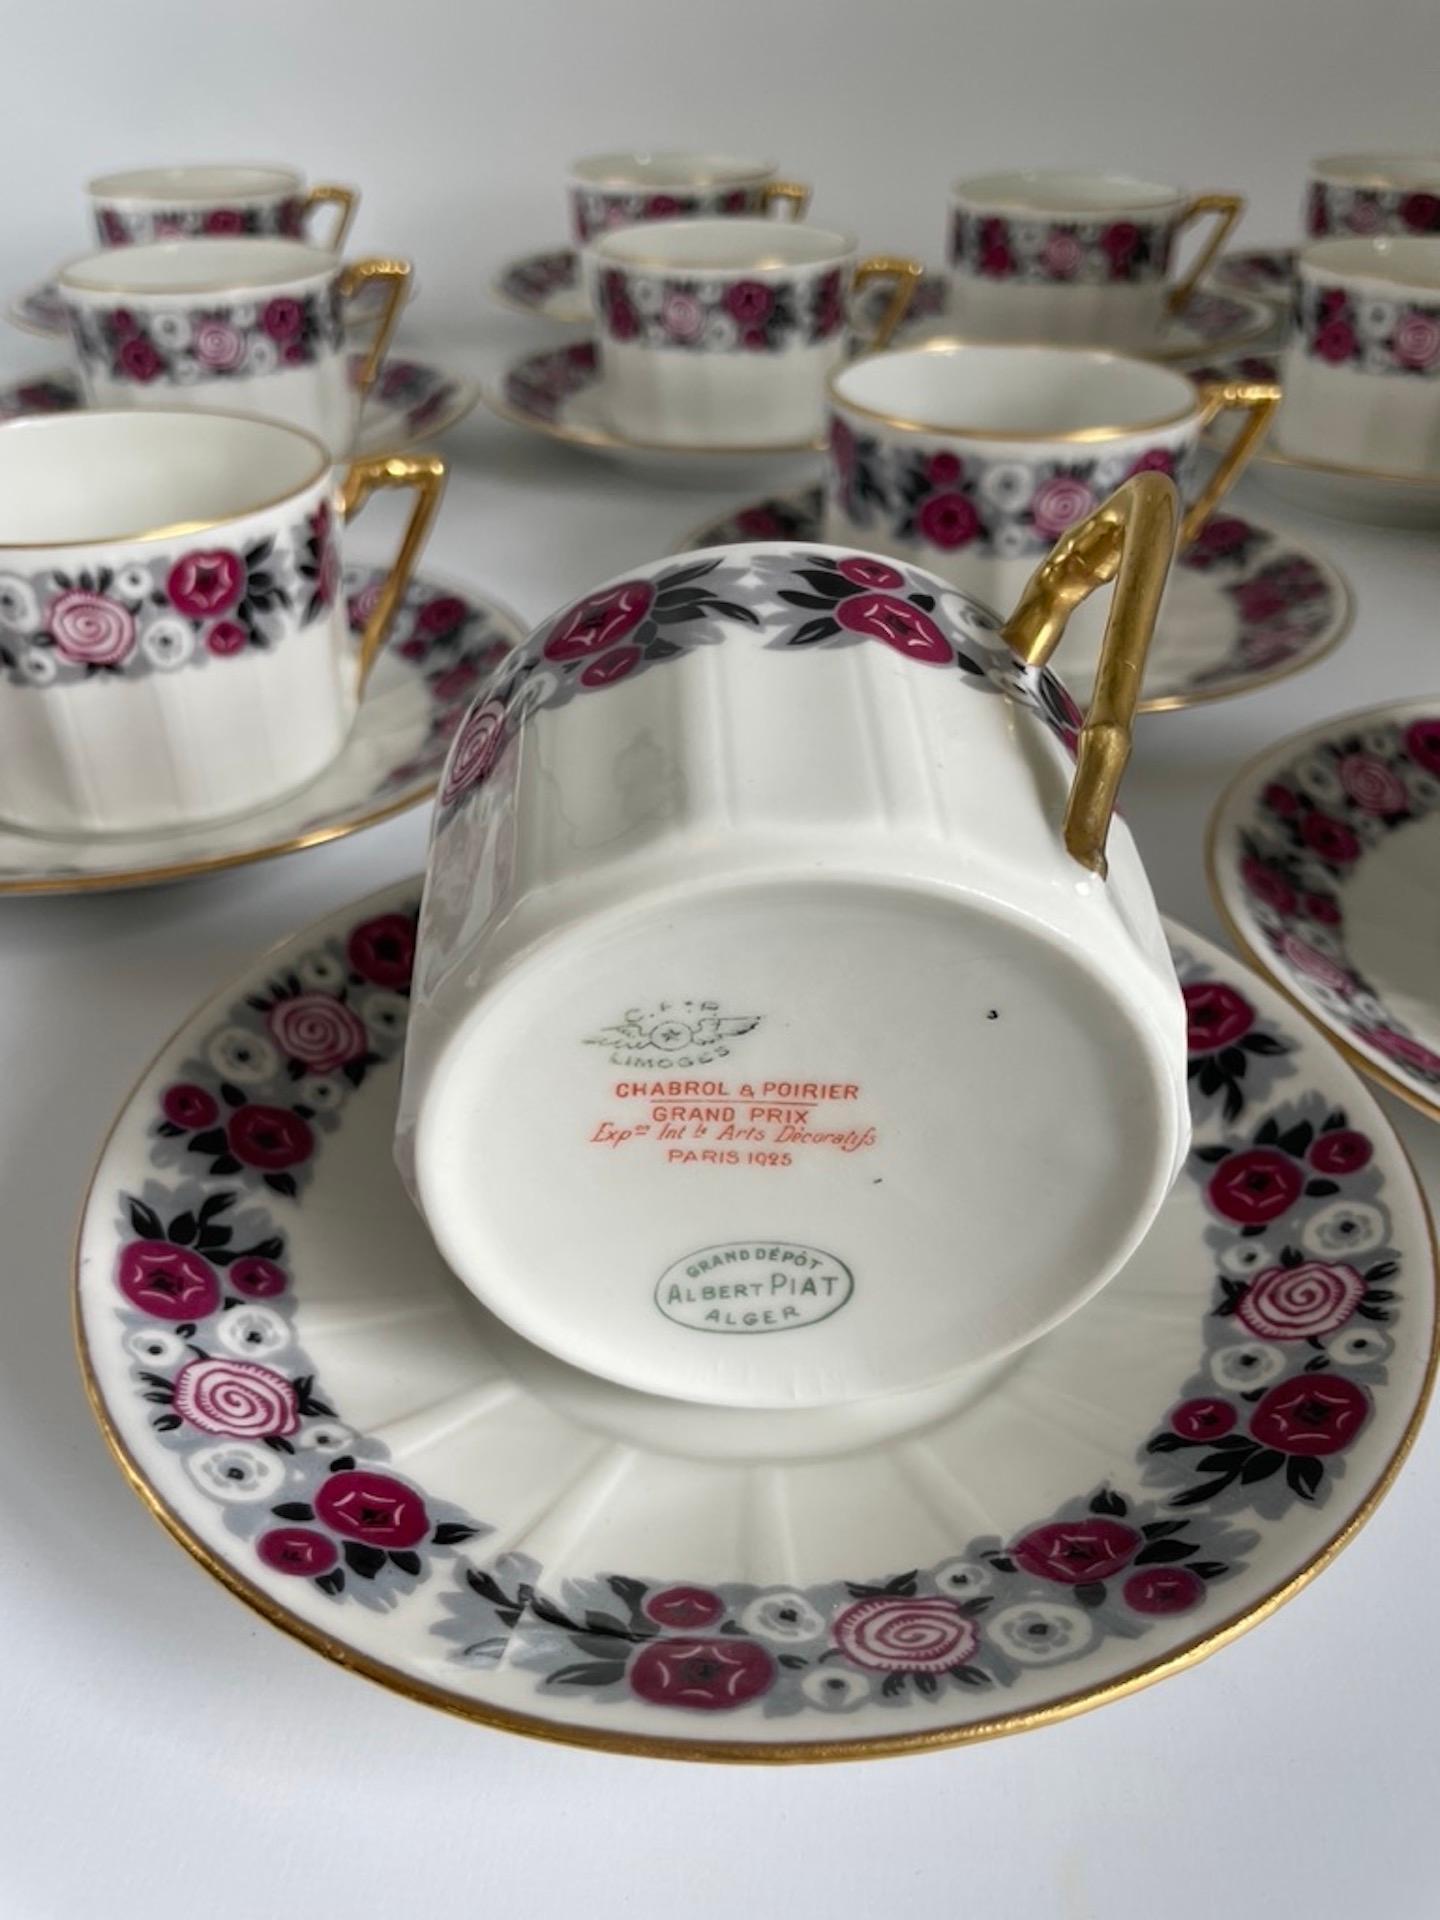 Art Deco Set Of 6 Cups Of Limoges Porcelain Tea Or Coffee From Chabrol and Poirier, 1925